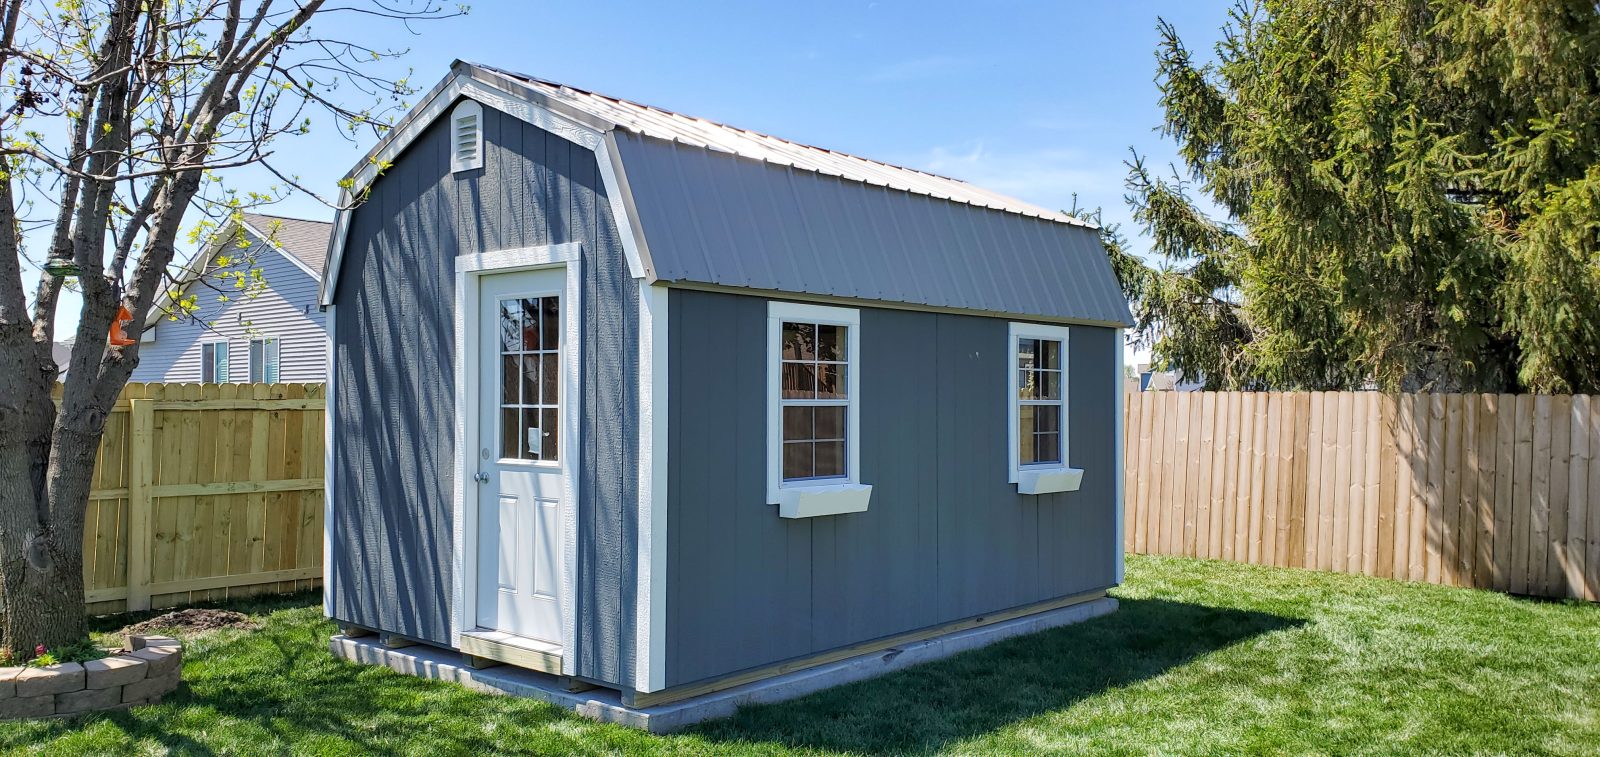 high barn storage sheds for sale in creston ia